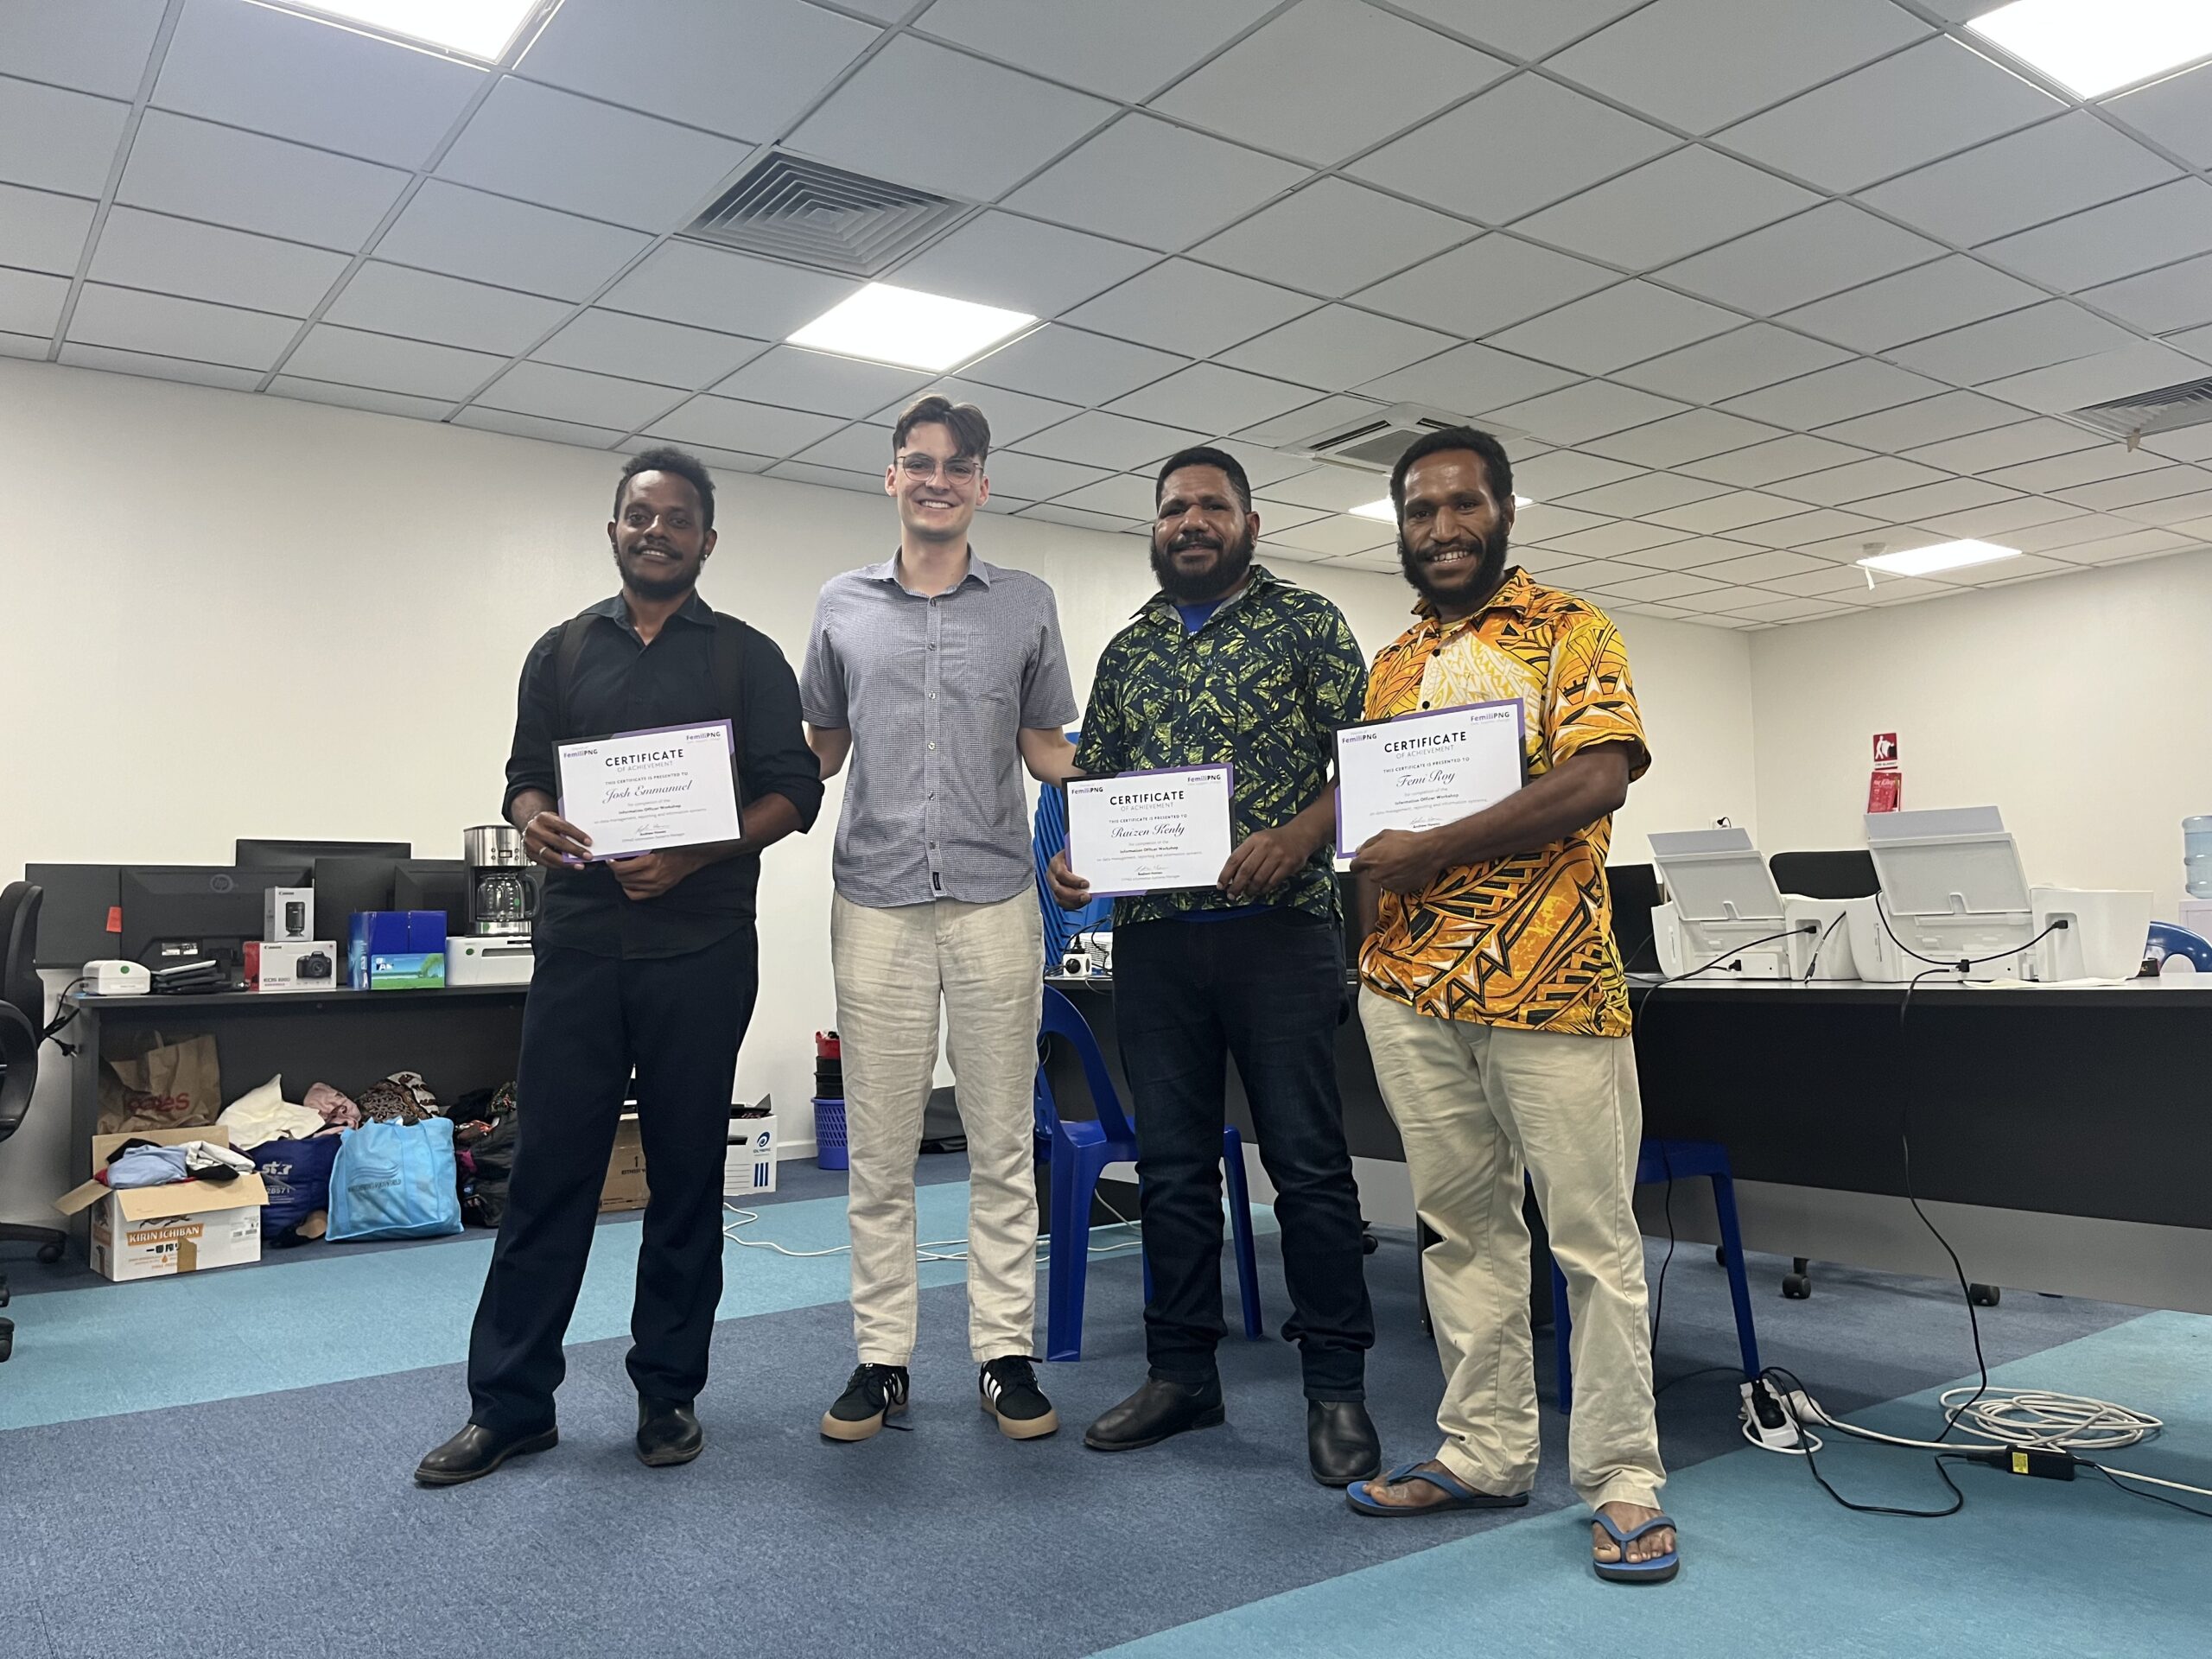 Femili PNG Information Officers receive certificates from FemiliPNG Australia after the workshop. From left to right, Joash Emmanuel, Andrew Howes, Raizen Kenly and Femi Roi.